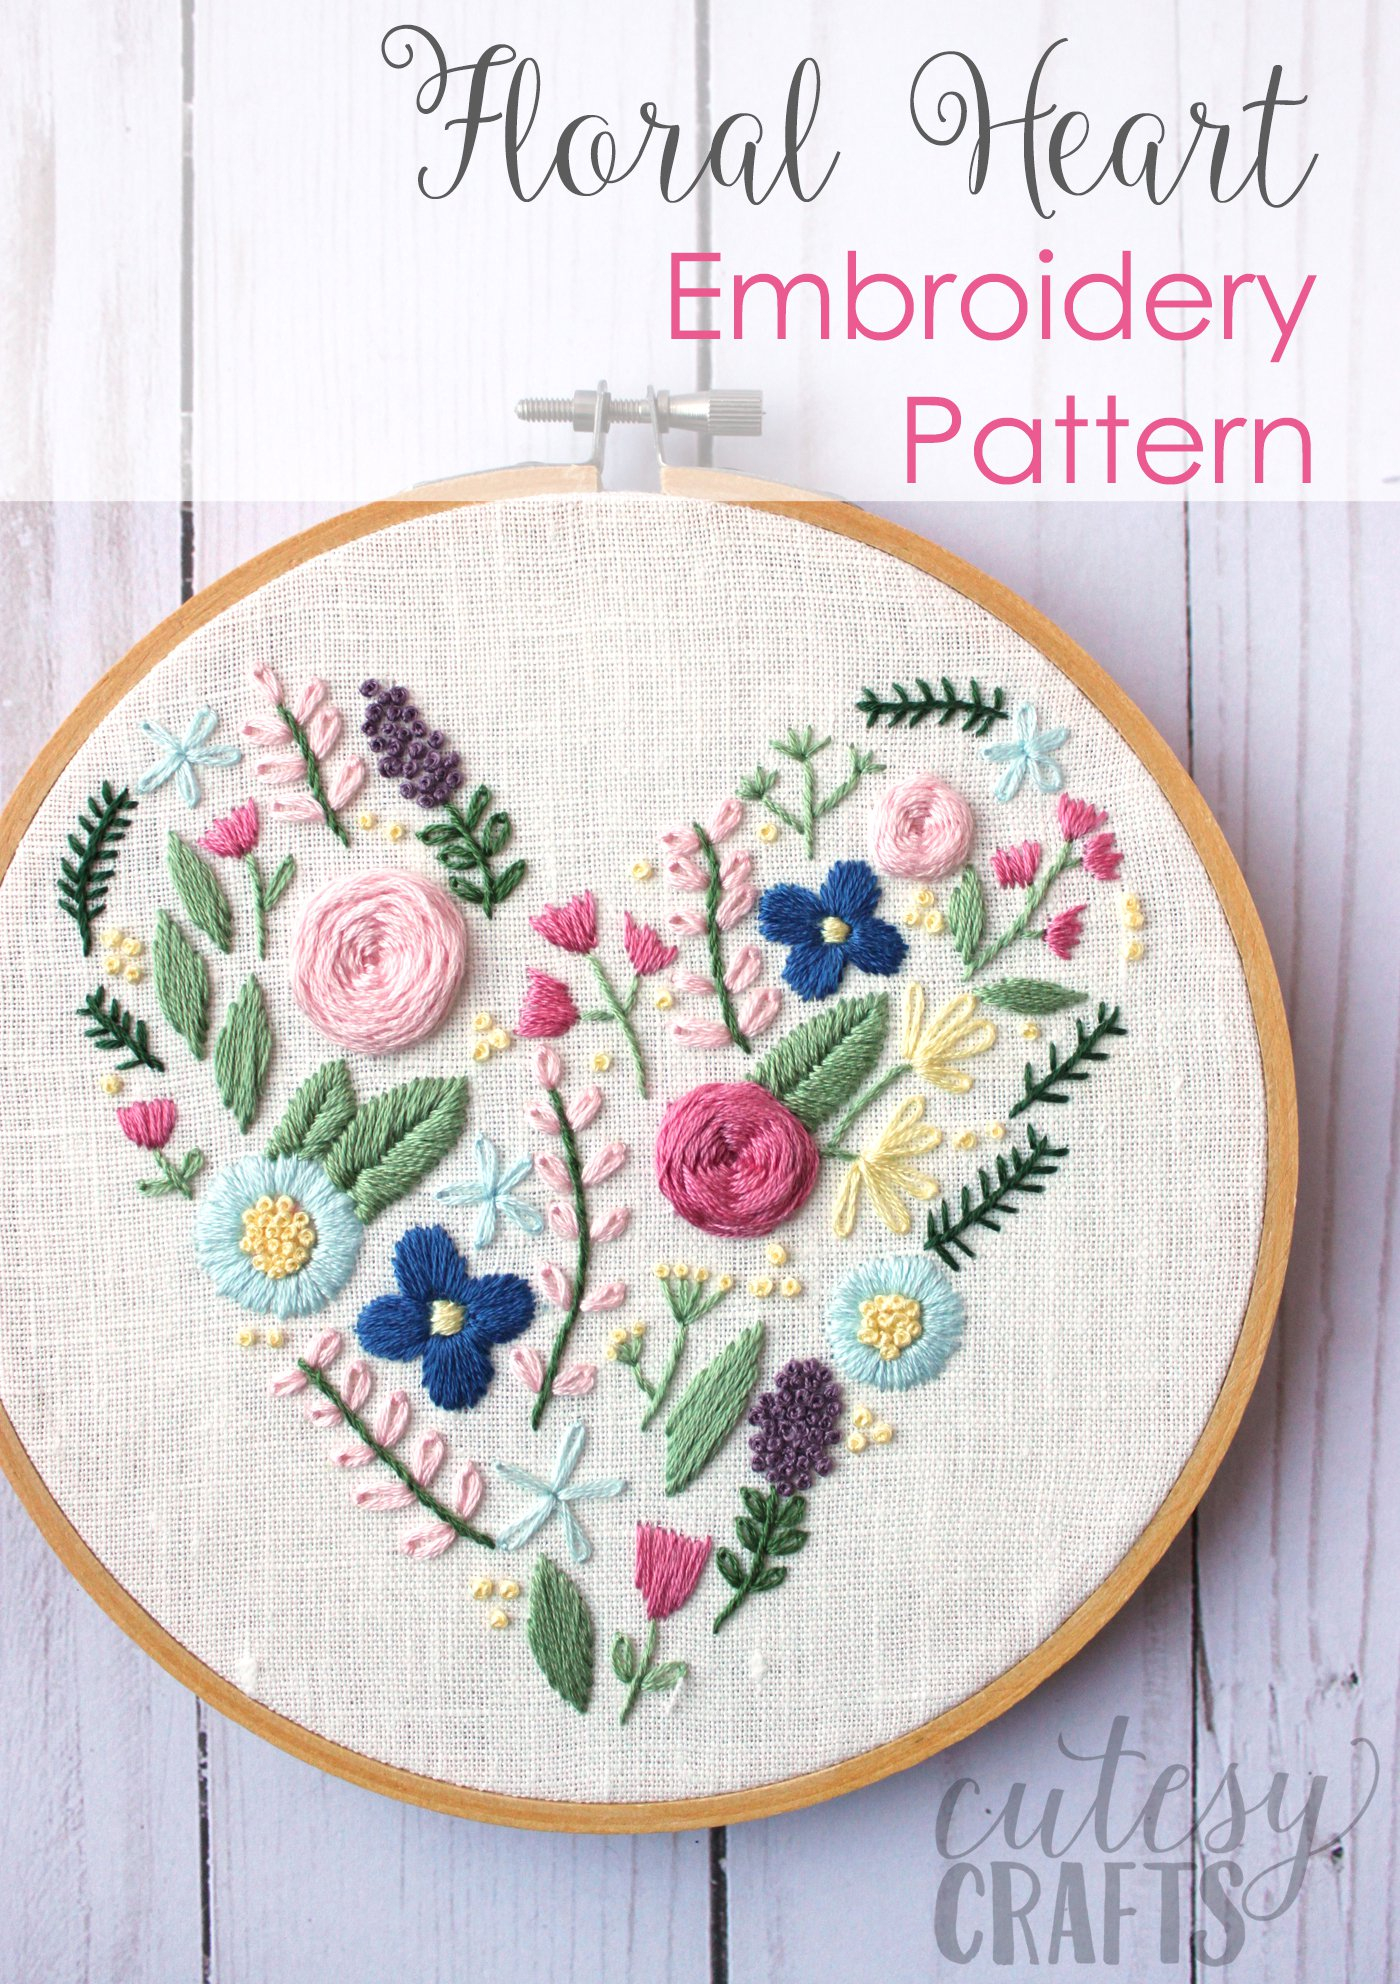 Hand Embroidery Patterns Free Floral Heart Hand Embroidery Pattern The Polka Dot Chair